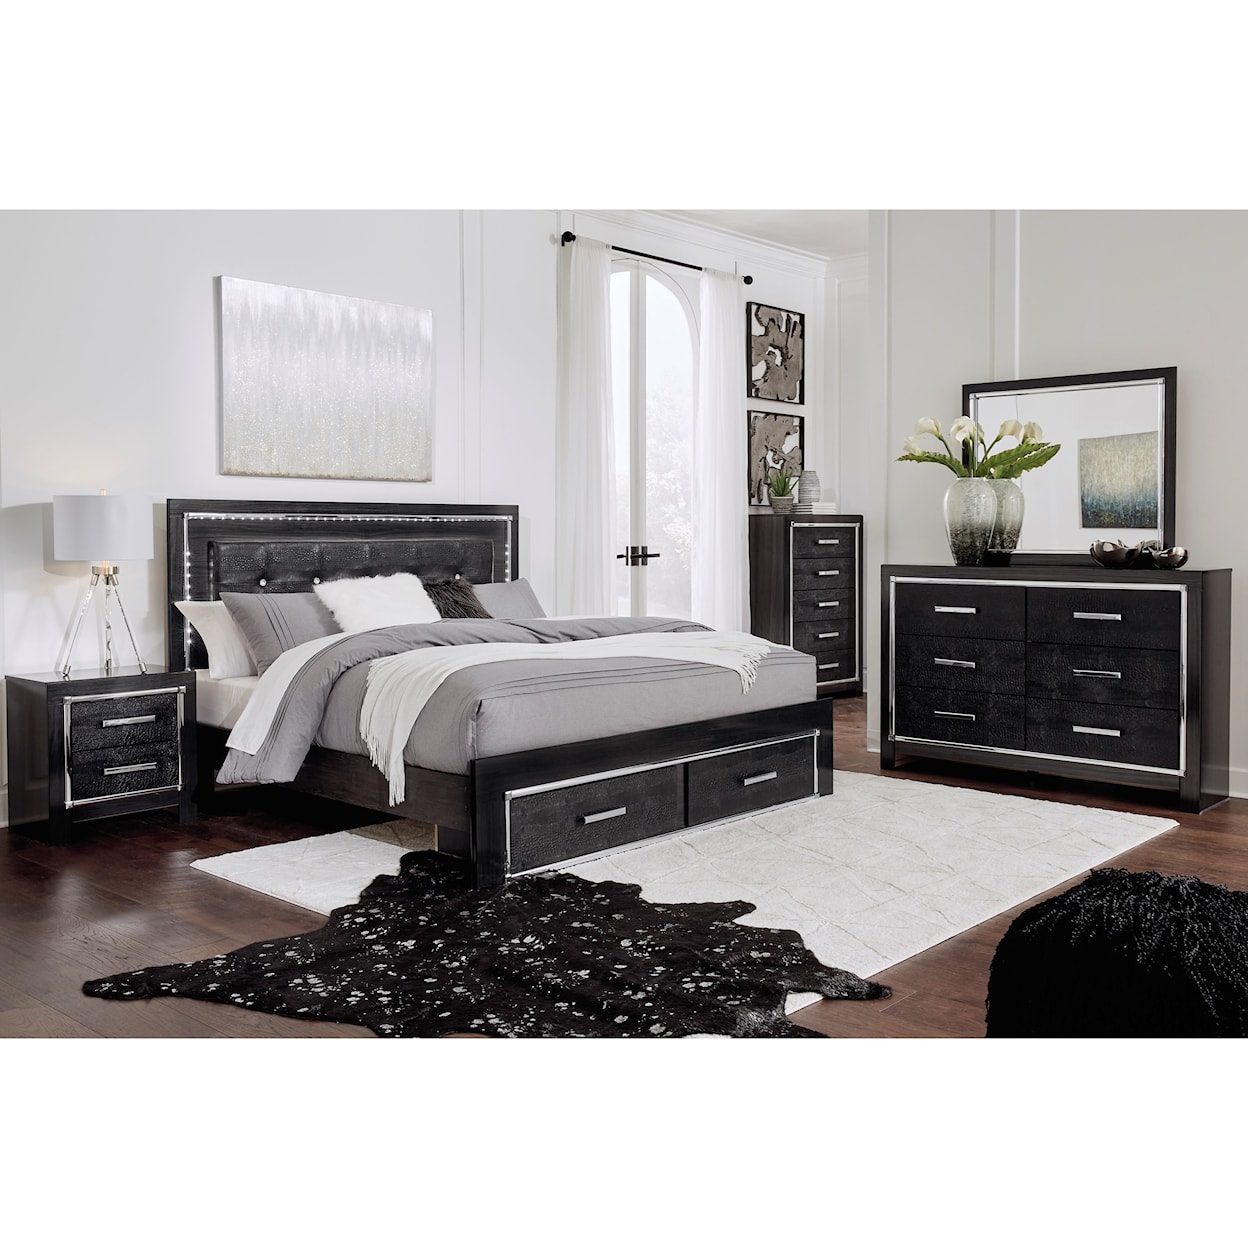 StyleLine Kaydell King Uph Storage Bed with LED Lighting